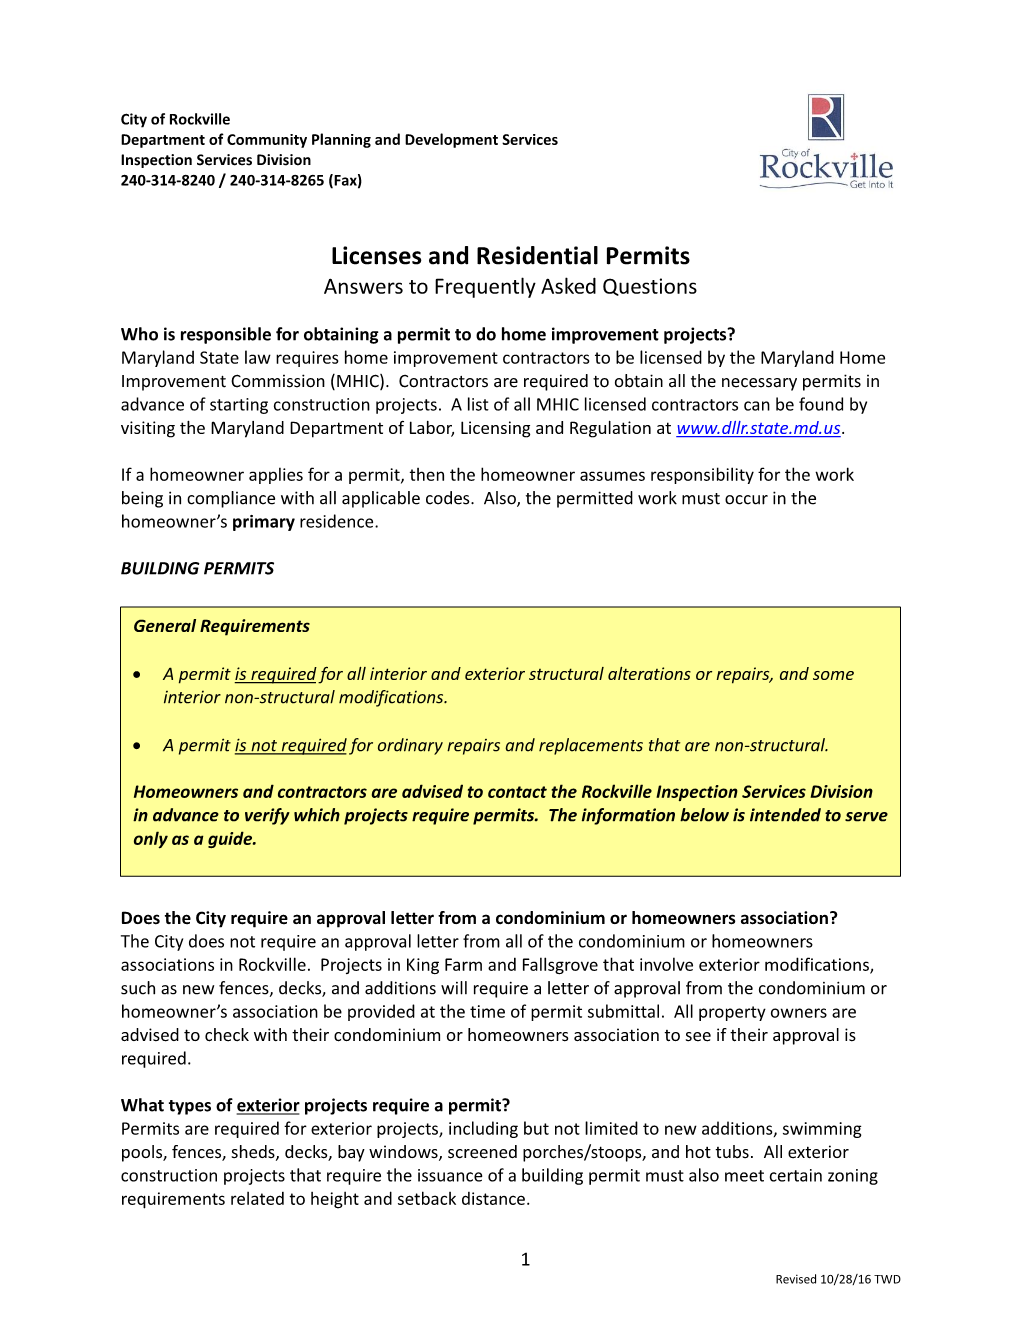 Licenses and Residential Permits Answers to Frequently Asked Questions